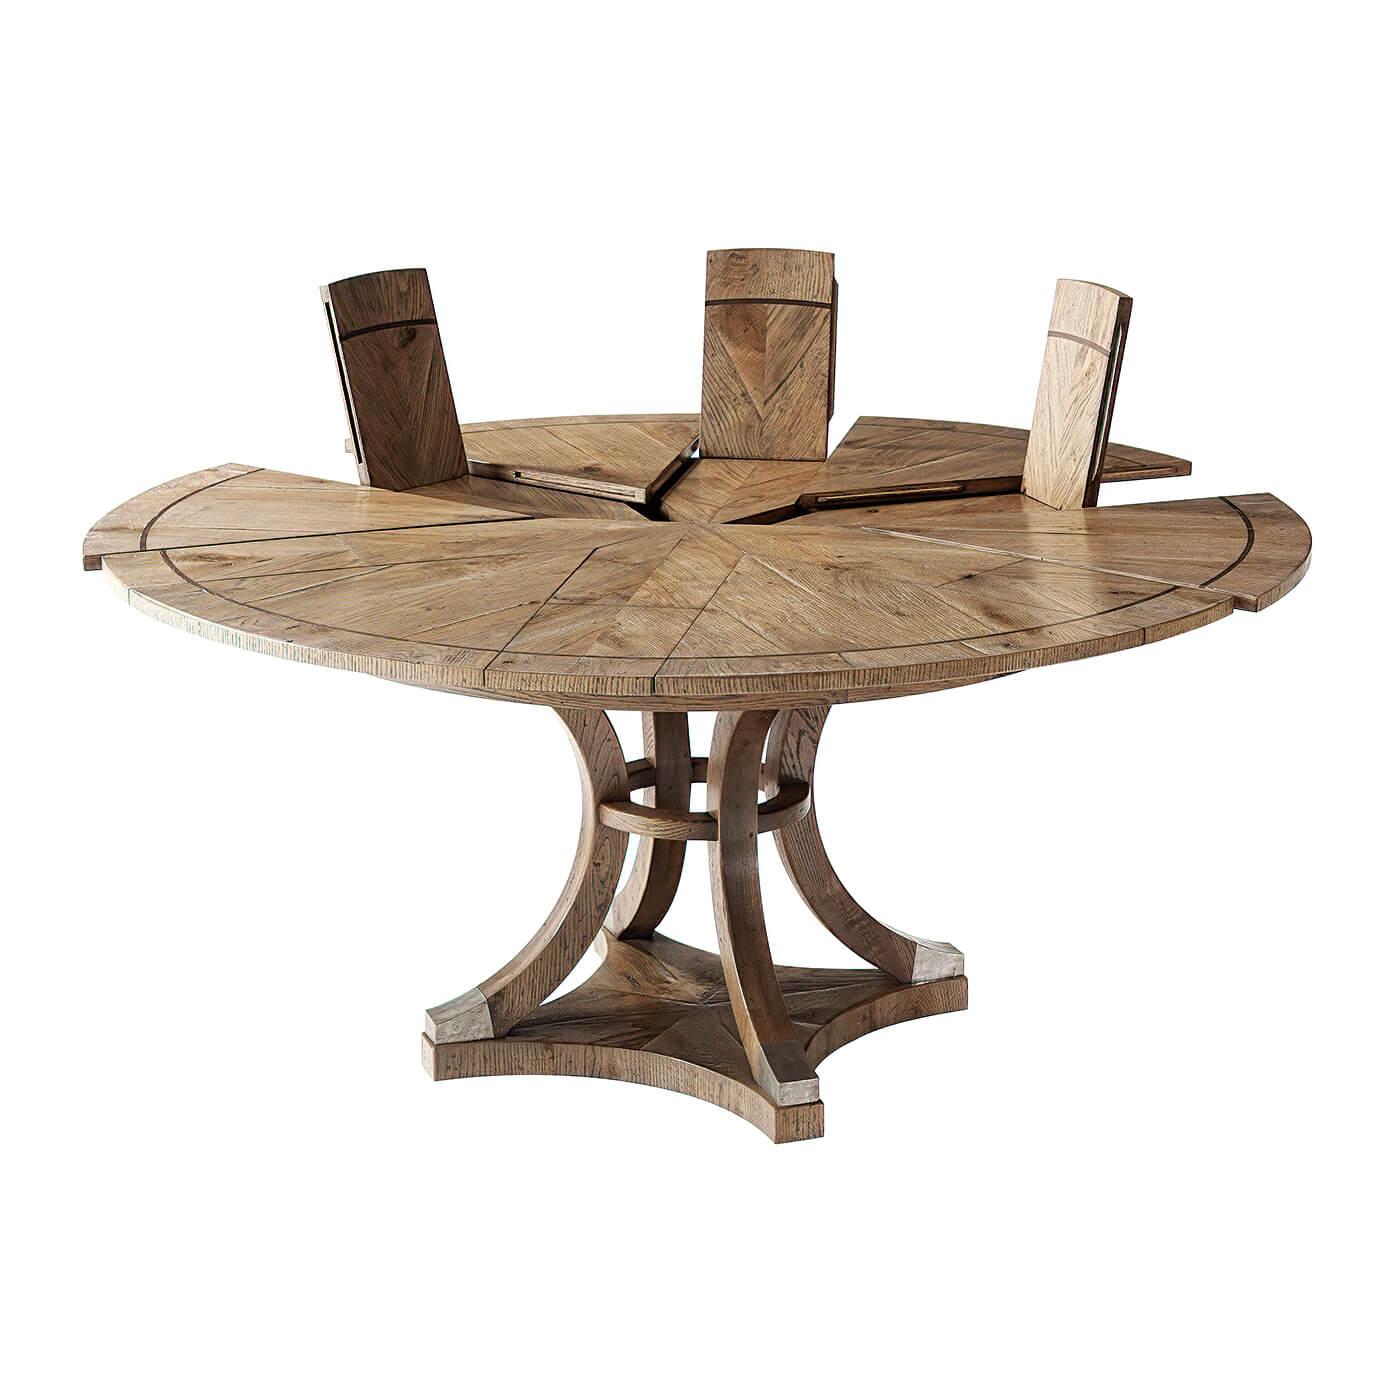 Modern oak parquetry and walnut inlaid top round self-storing extension dining table with six pull out top sections opening to reveal 6 fold-out leaves, above inswept solid oak legs with a central collar and 'Vintage' metal cast cappings.

Open